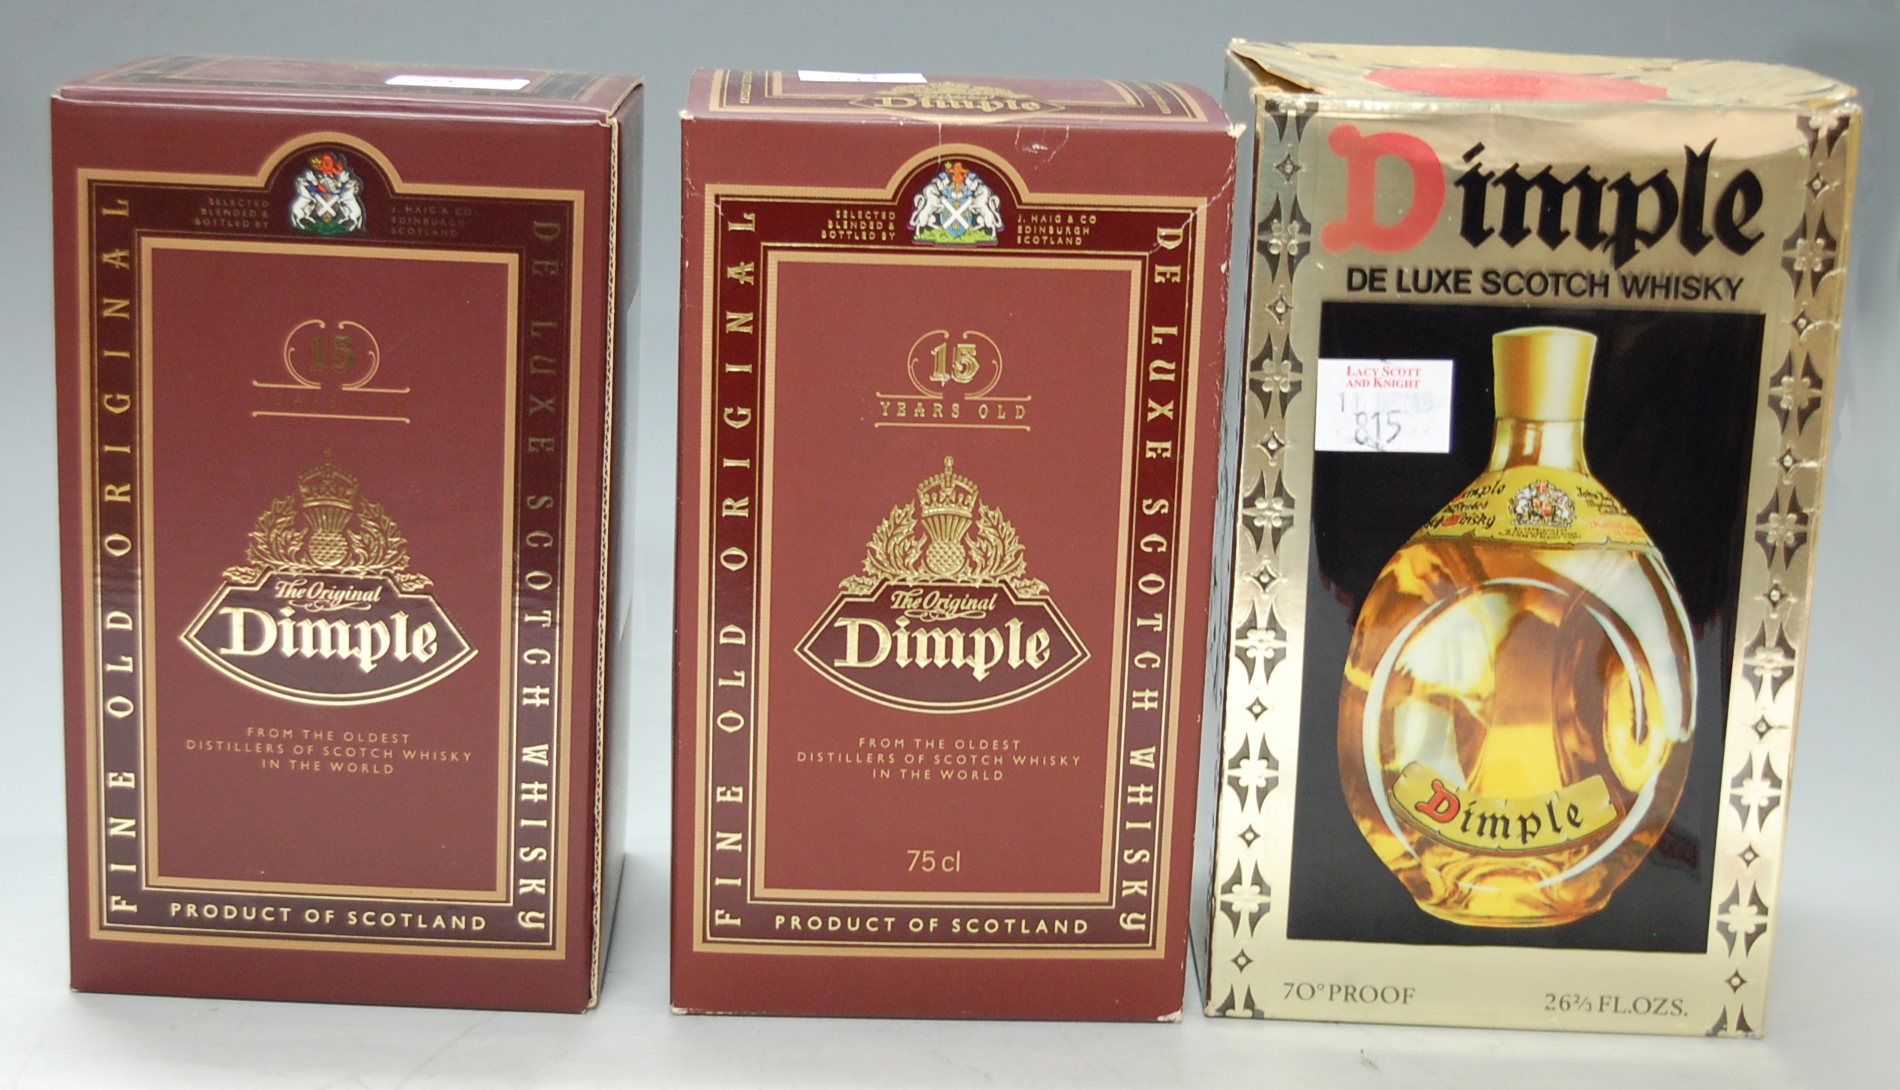 Dimple 15 year old scotch whisky, 75cl, 43%, boxed; one other; and a Dimple Deluxe scotch whisky,